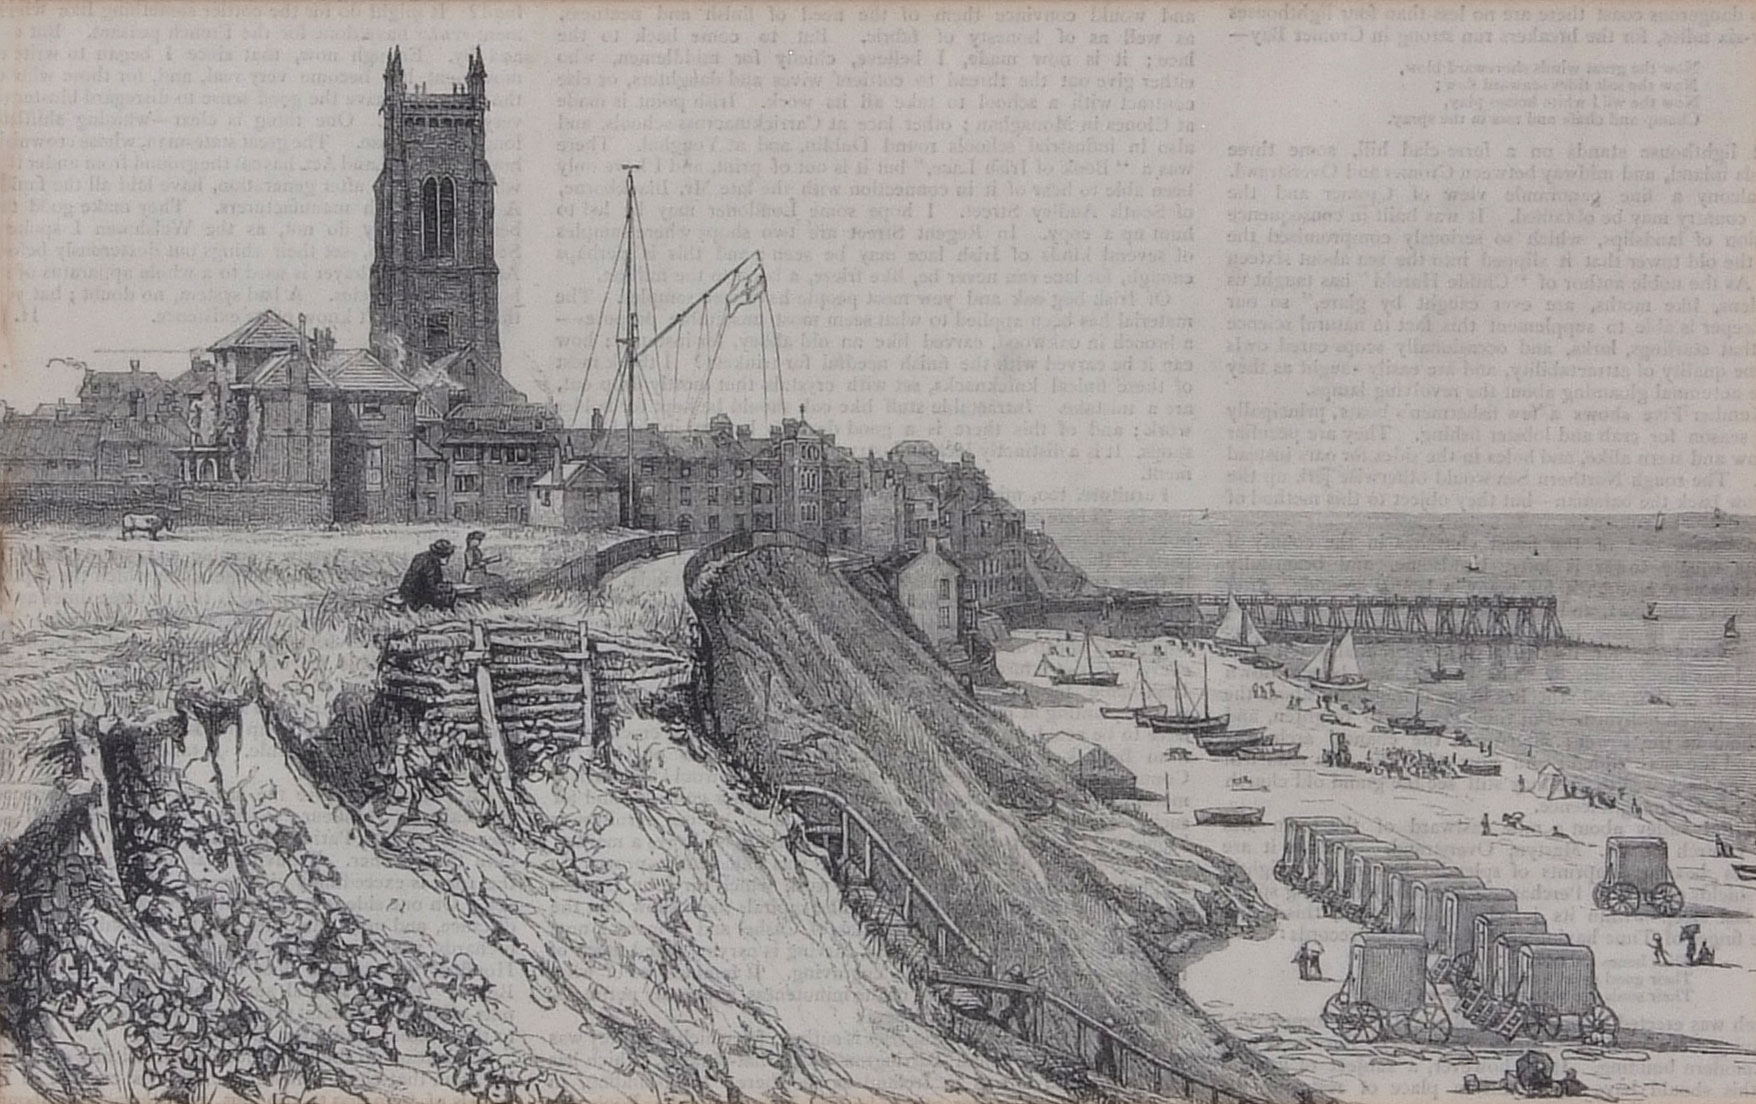 English School (19th century), "Cromer, 1823", black and white lithograph, 12 x 19cm, together - Image 4 of 4